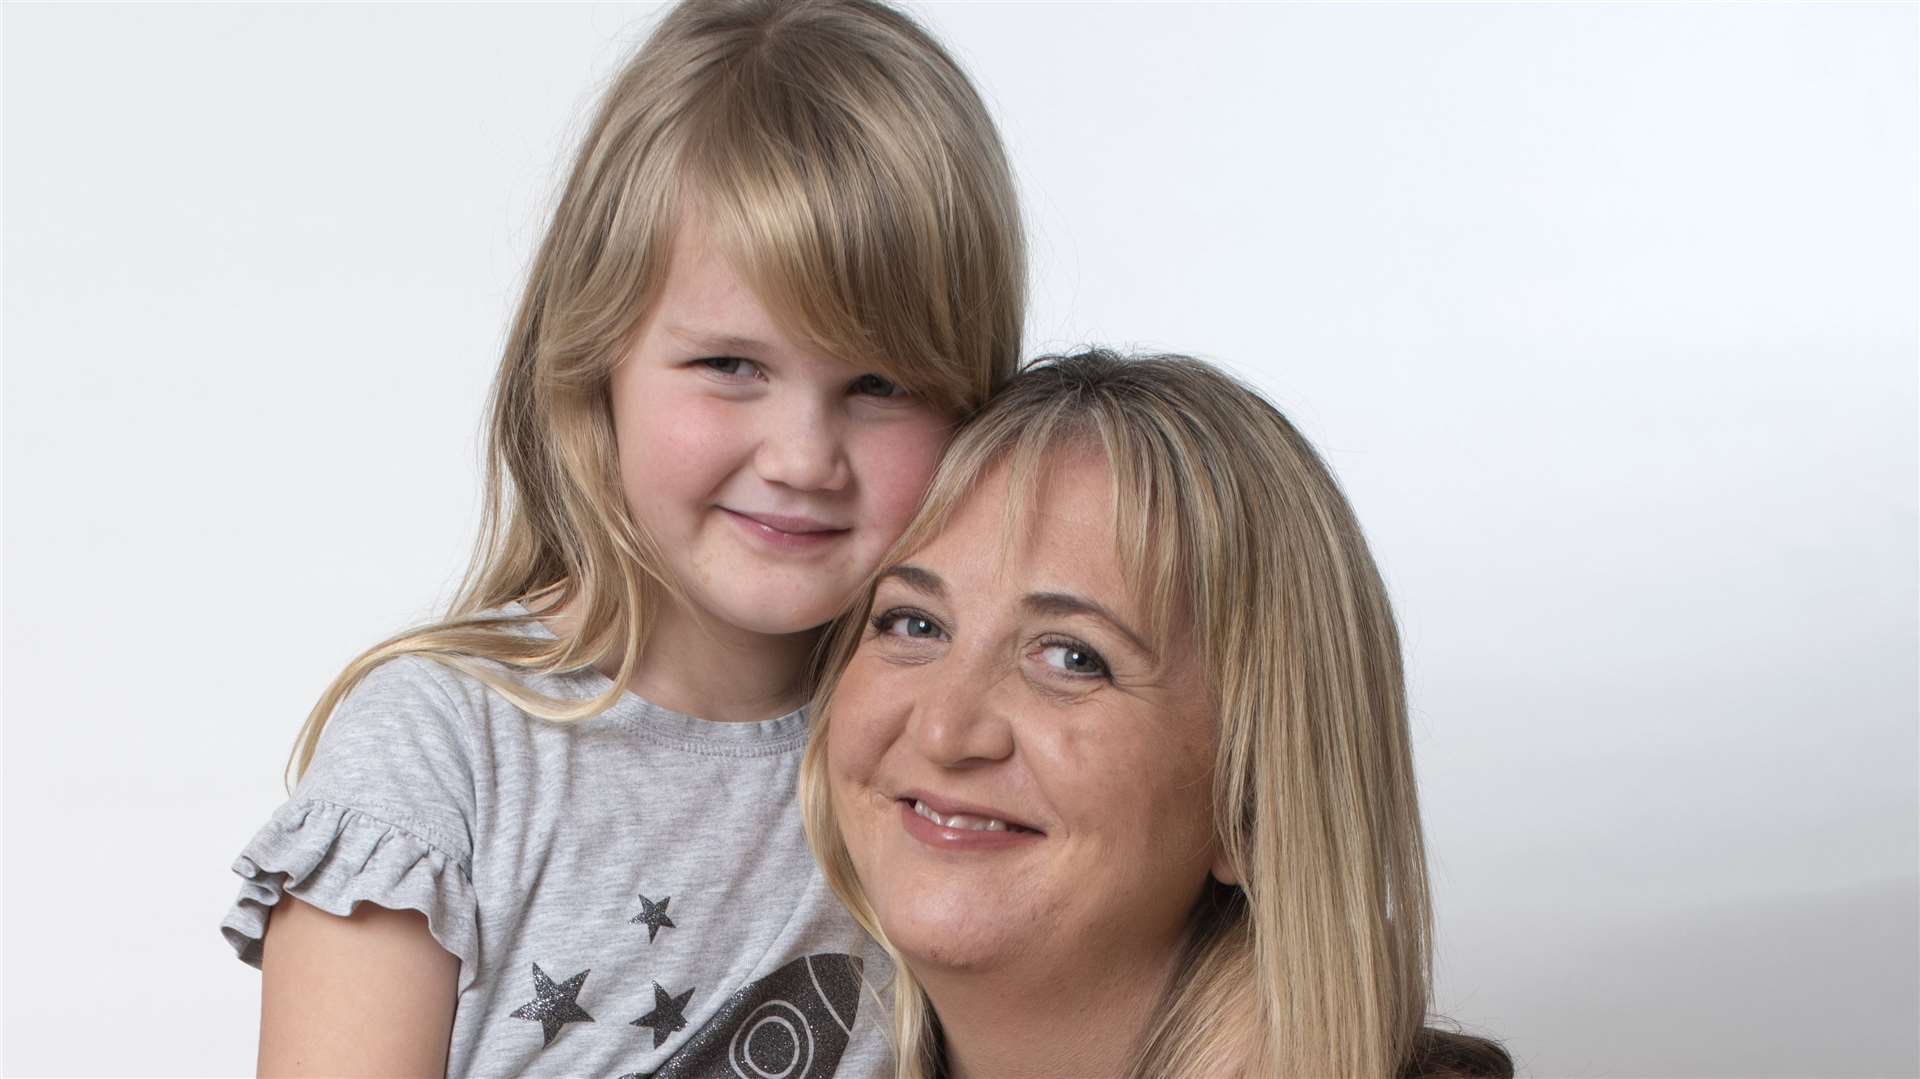 Natasha Harding and daughter Lexi. From West Malling. (10507321)